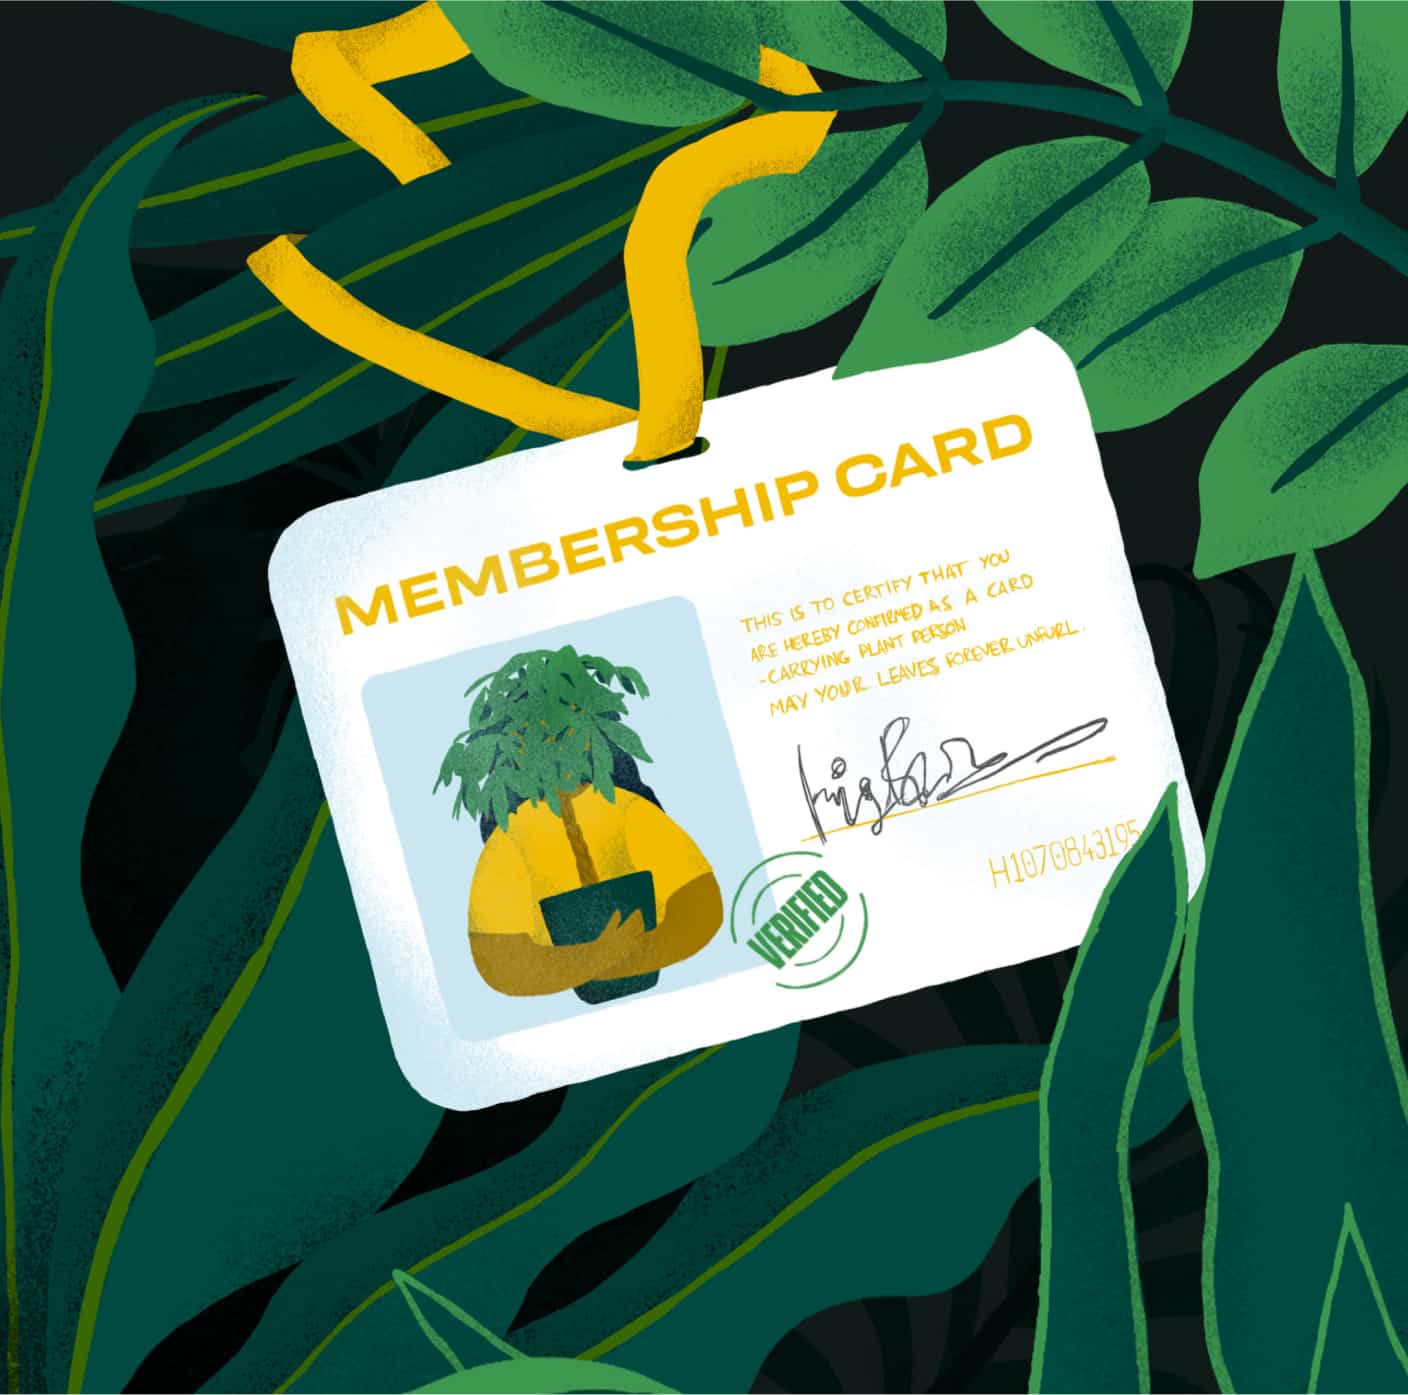 An illustration of a Hedira membership card on a yellow lanyard, against a leafy background.